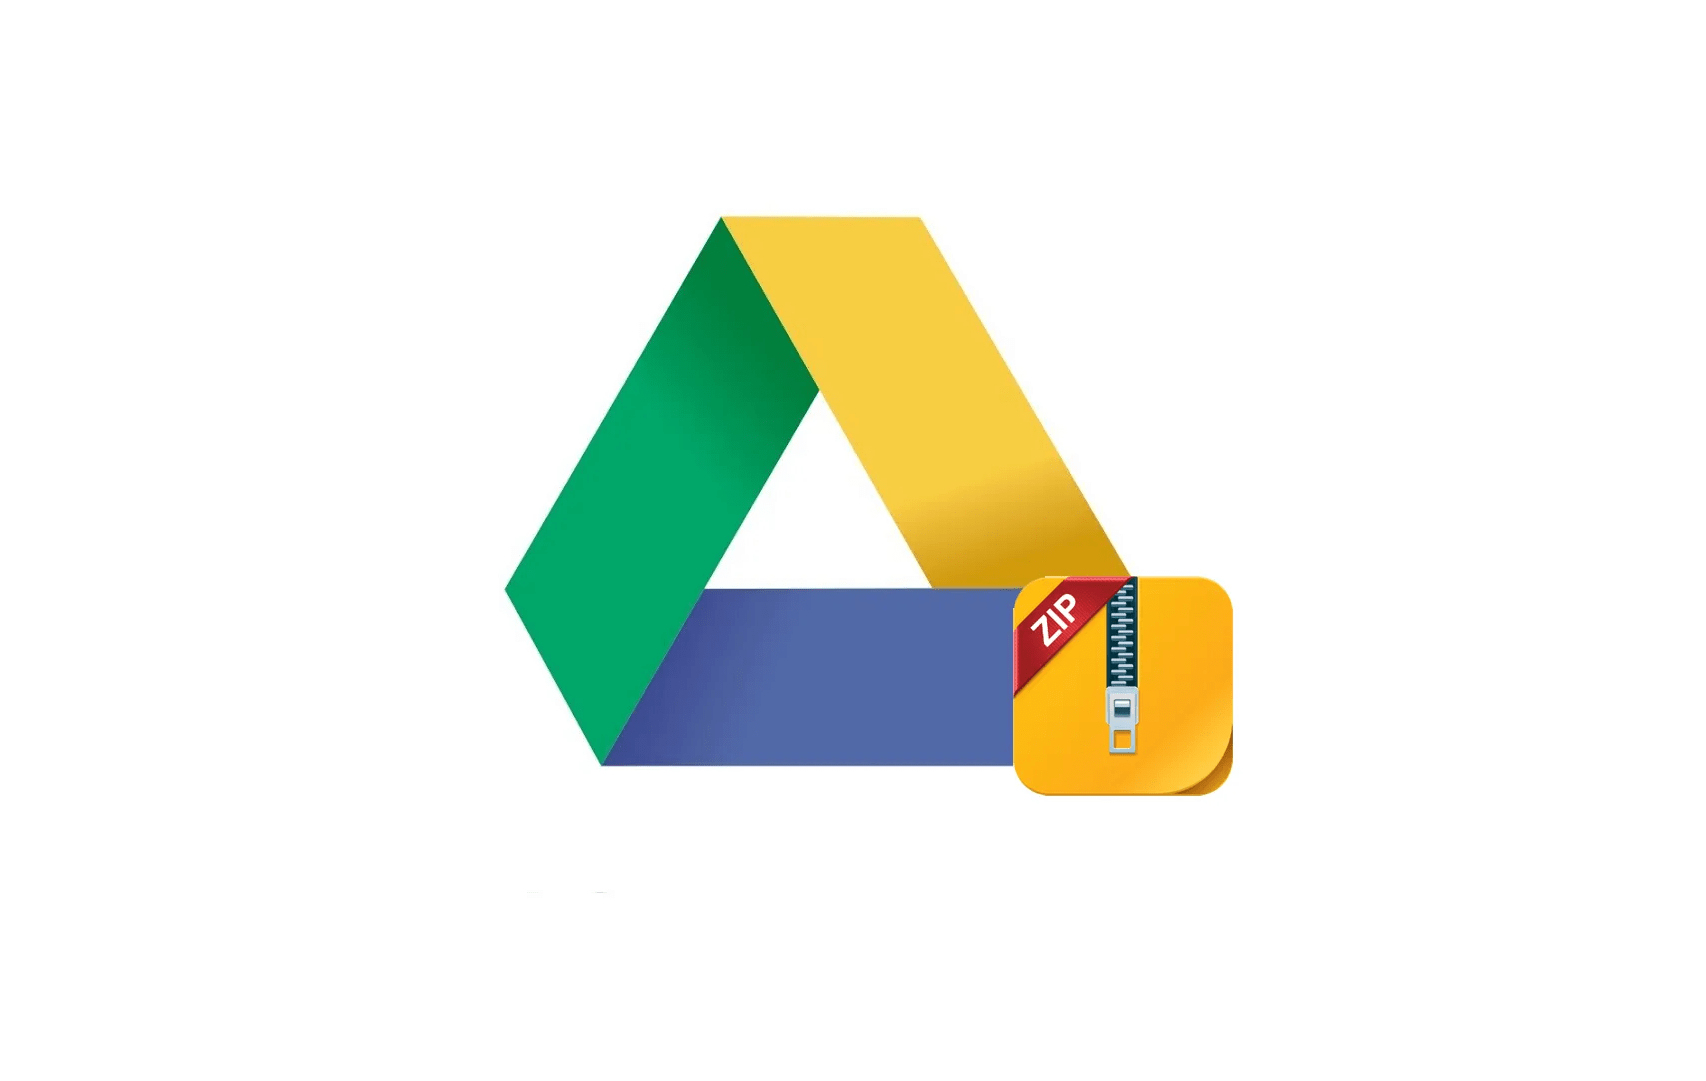 How To Download Files From Google Drive Without Zipping